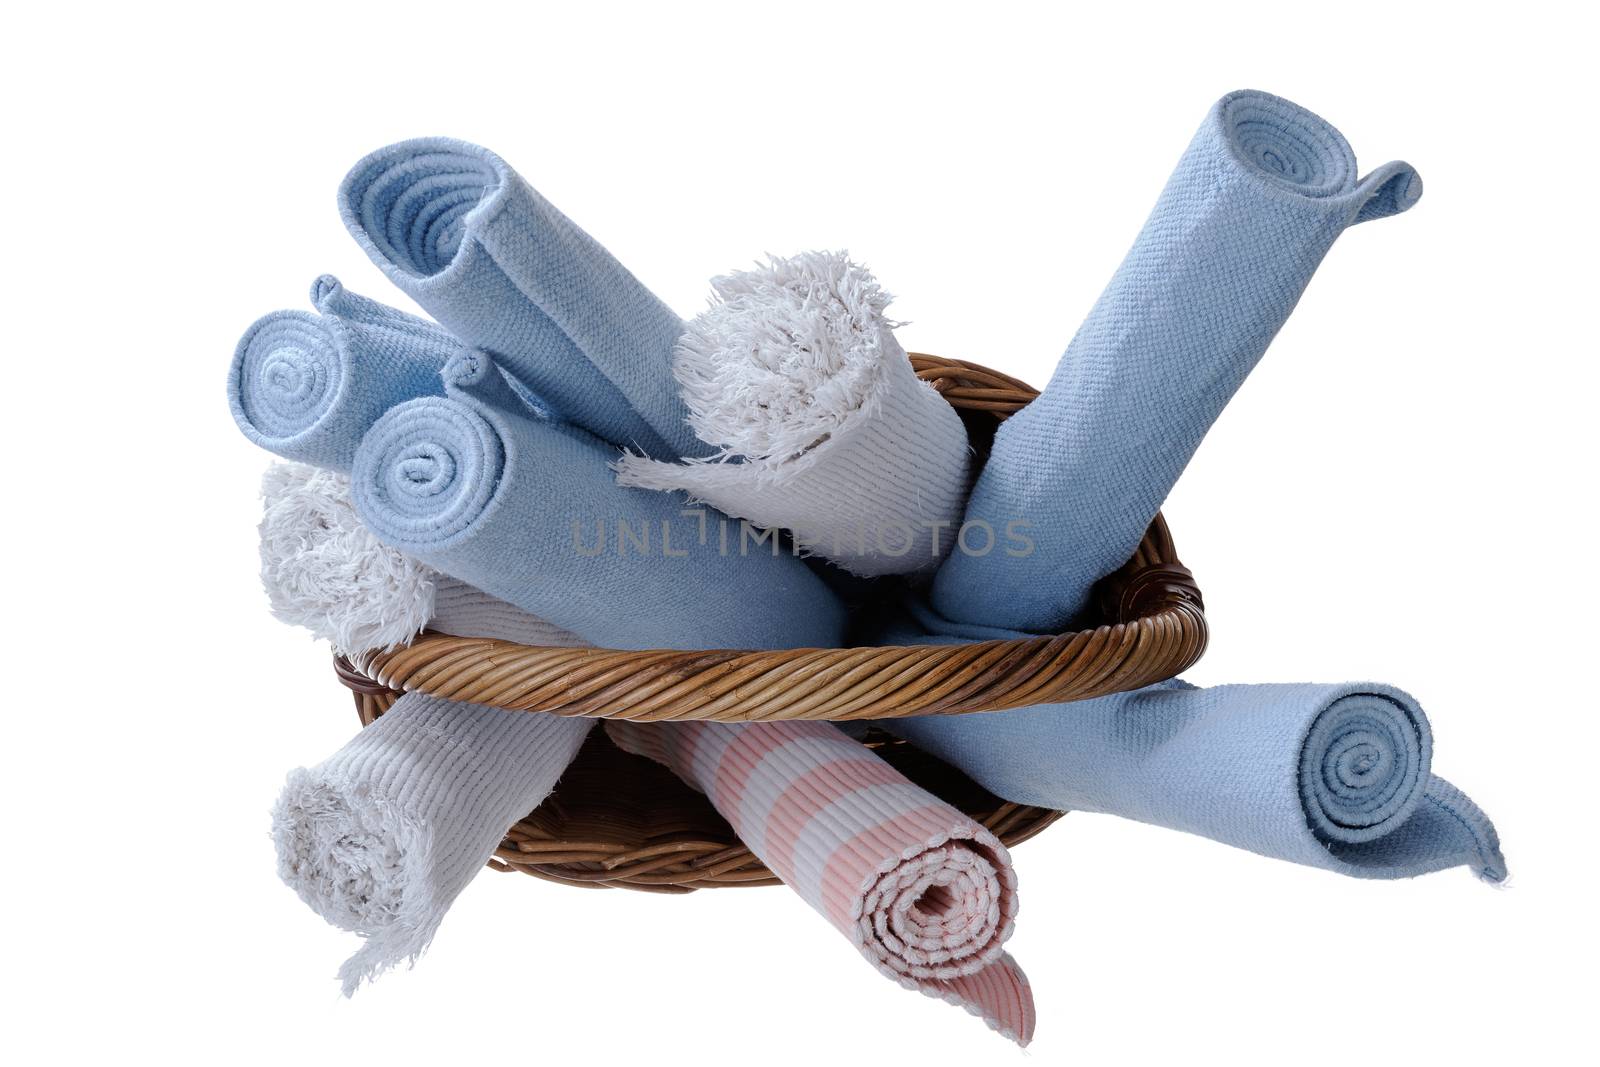 High Angle View of Assorted Newly Washed Rolled Rugs in a Wooden Basket Isolated on a White Background.